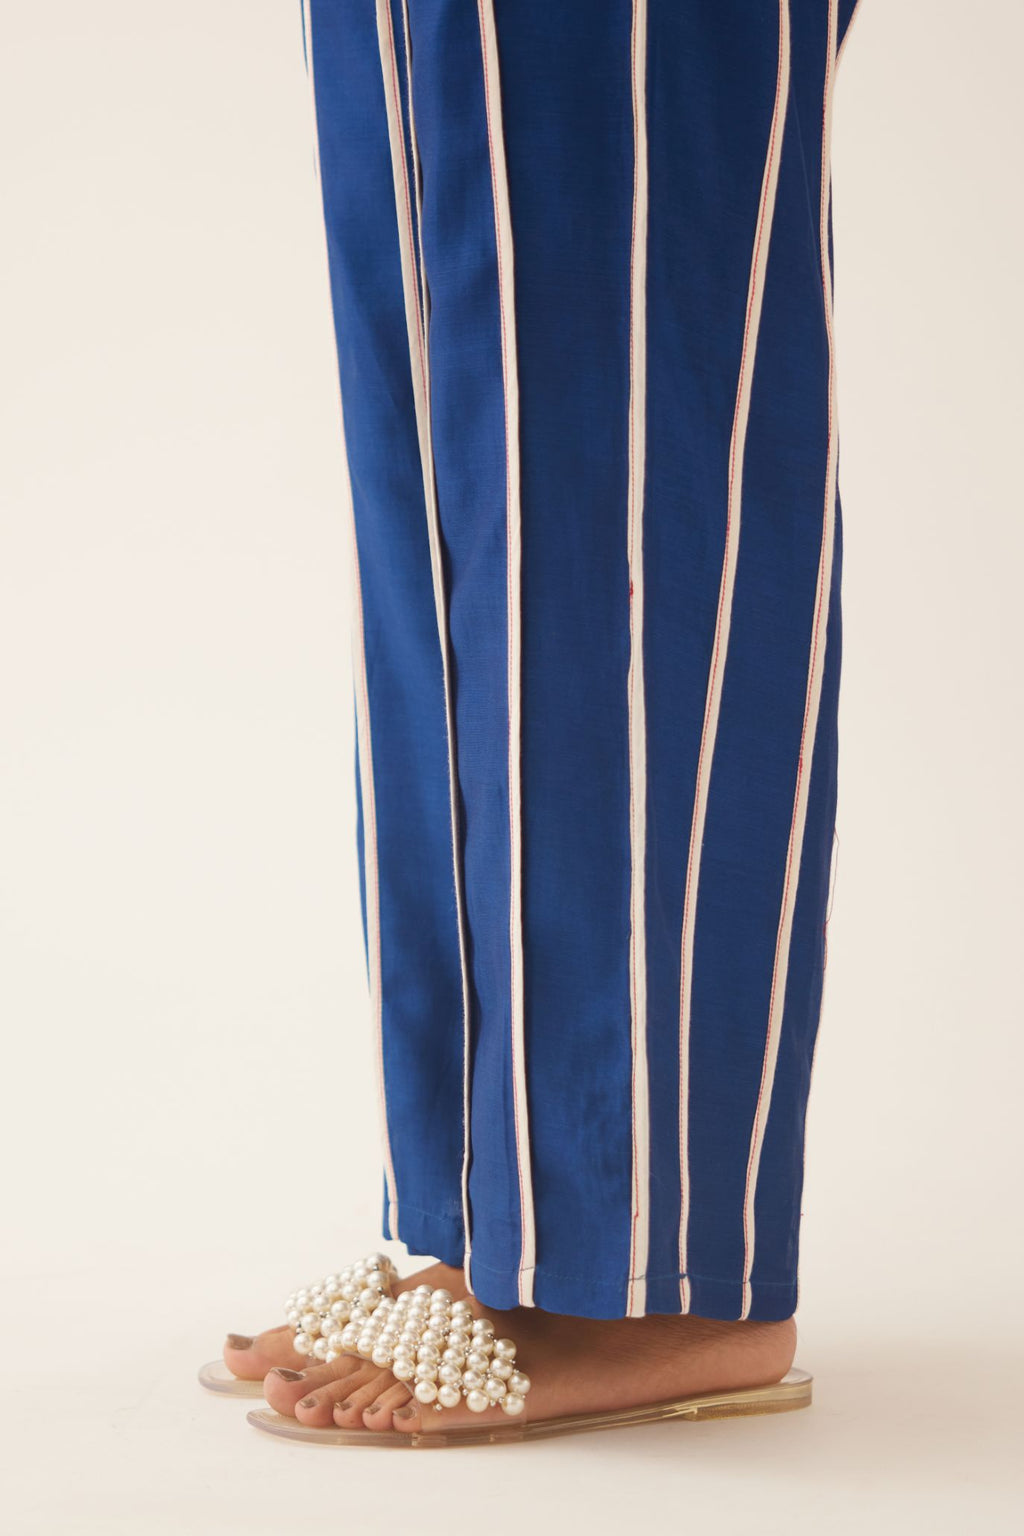 Blue silk chanderi straight pants with vertical off white piping detail.